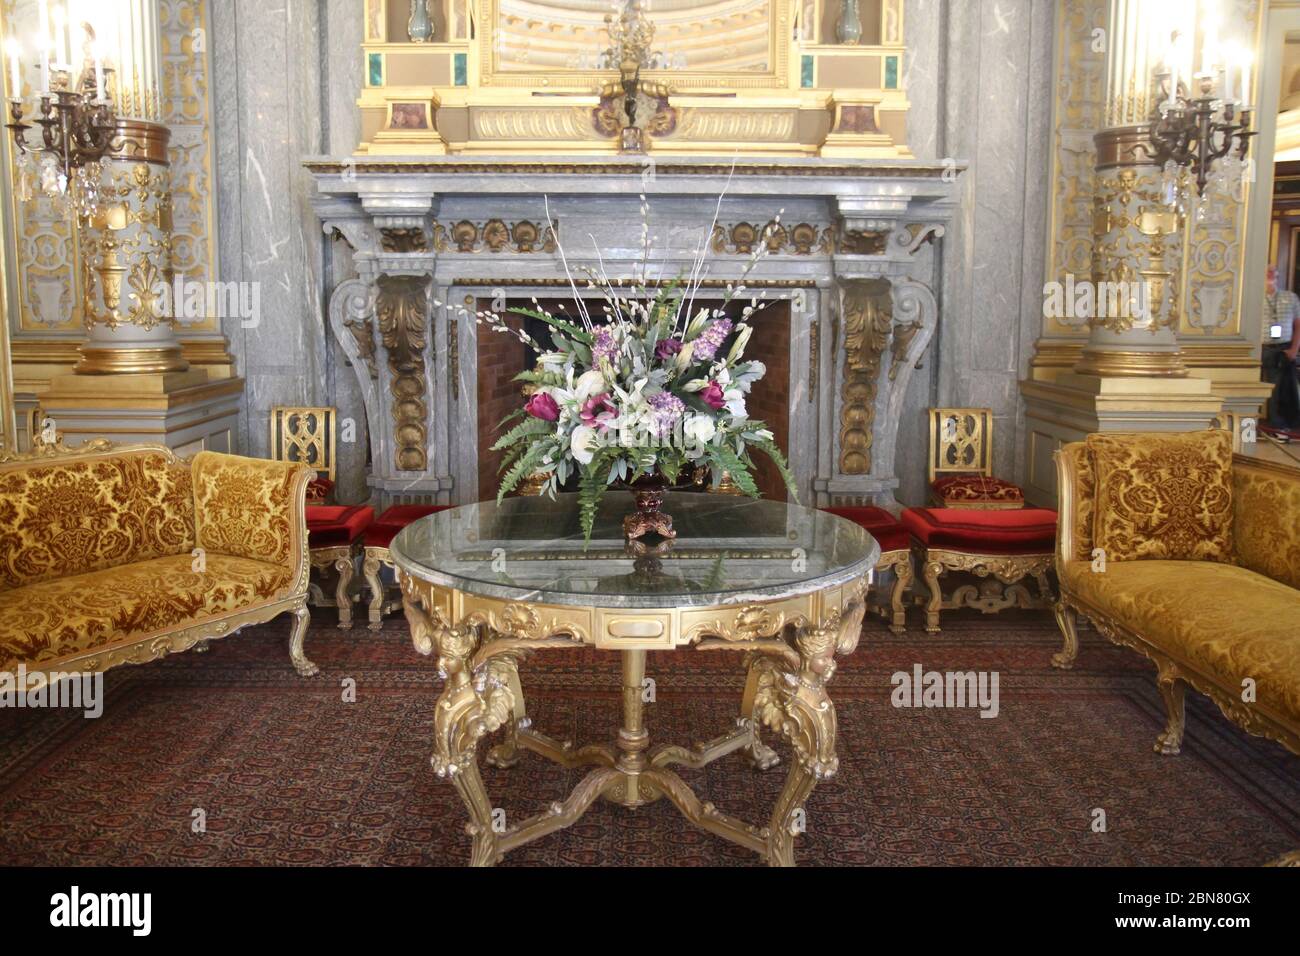 Floral centerpiece amidst the opulent decor inside the Breakers mansion, Newport, Rhode Island, United States Stock Photo